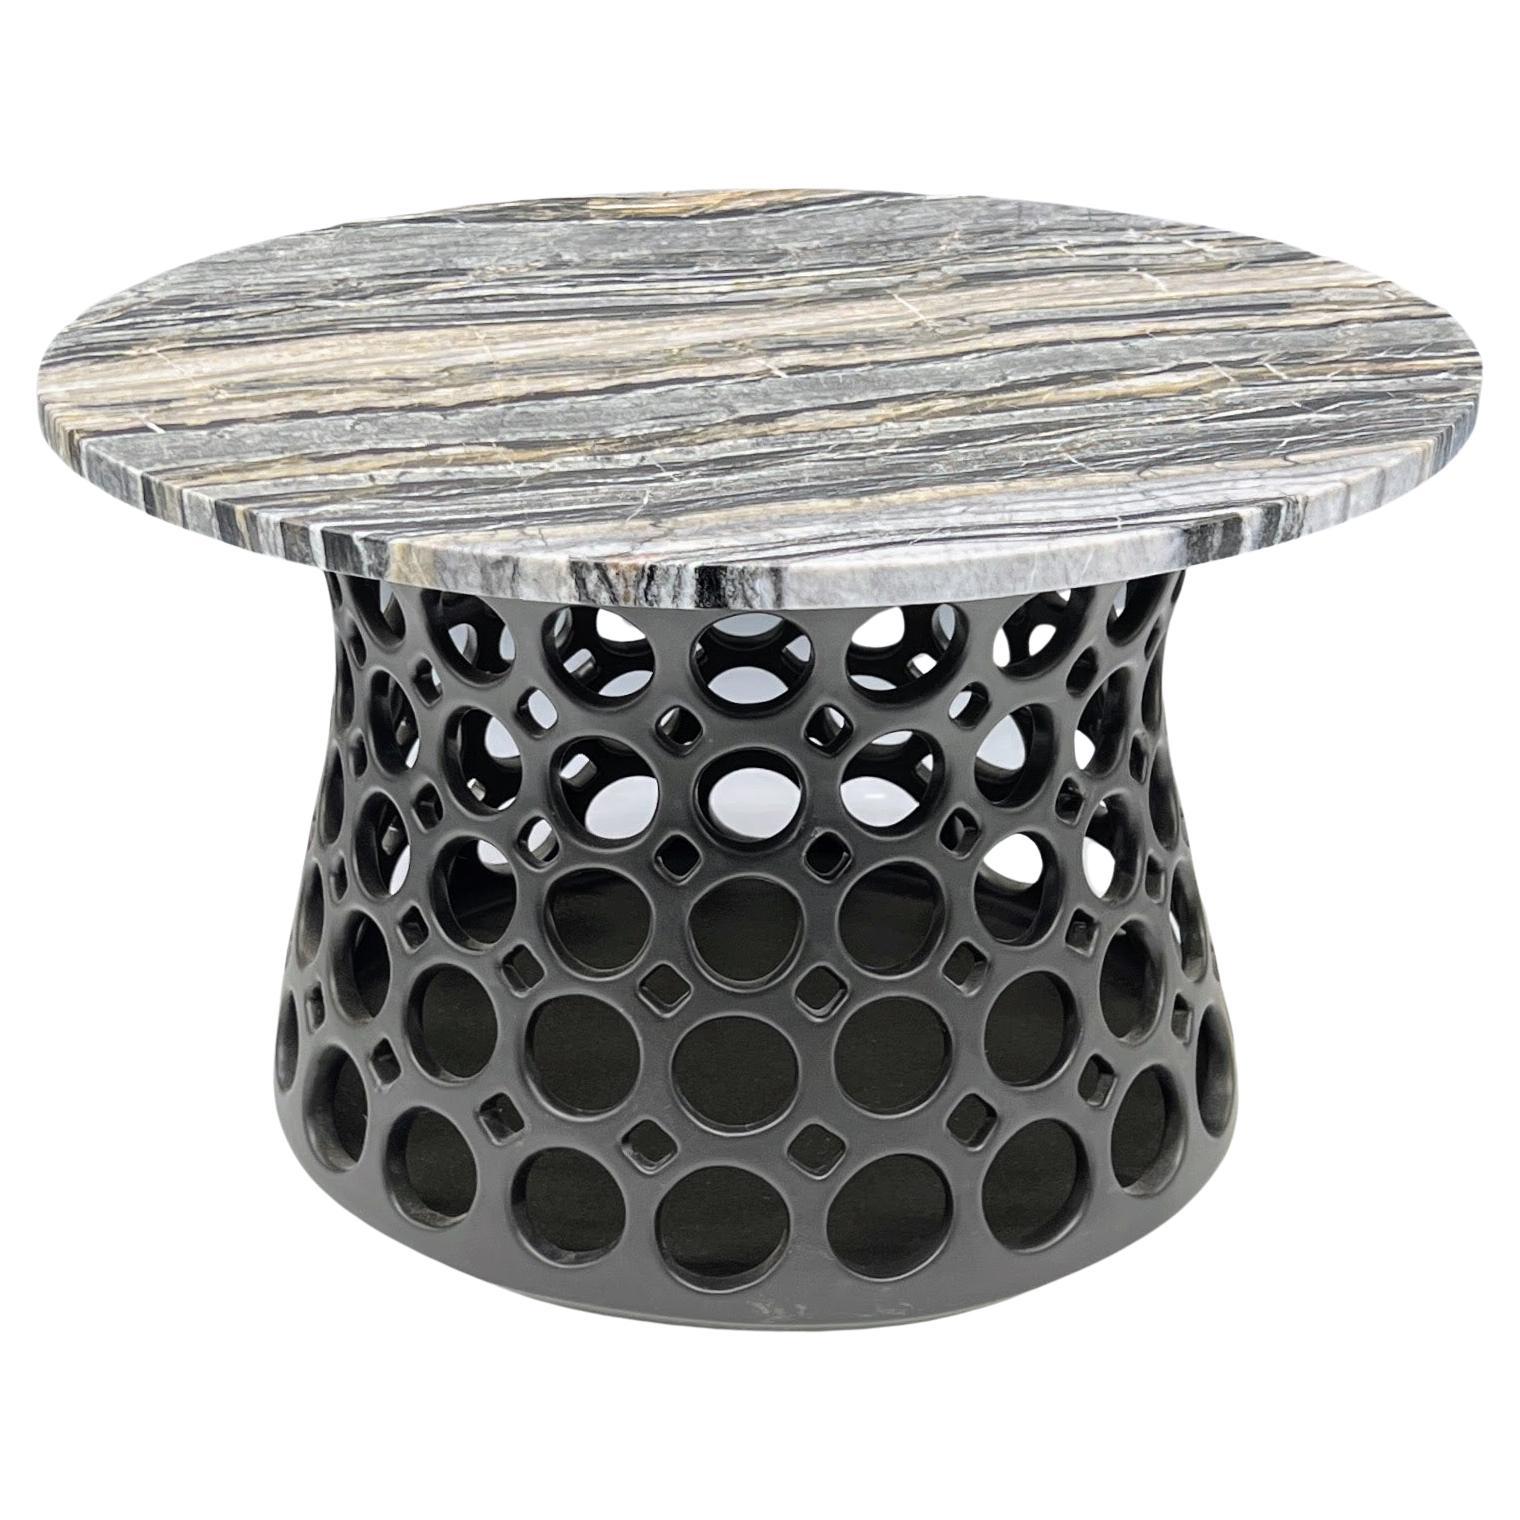 Pierced Ceramic Side Table with Black, Grey, White Stone Top For Sale